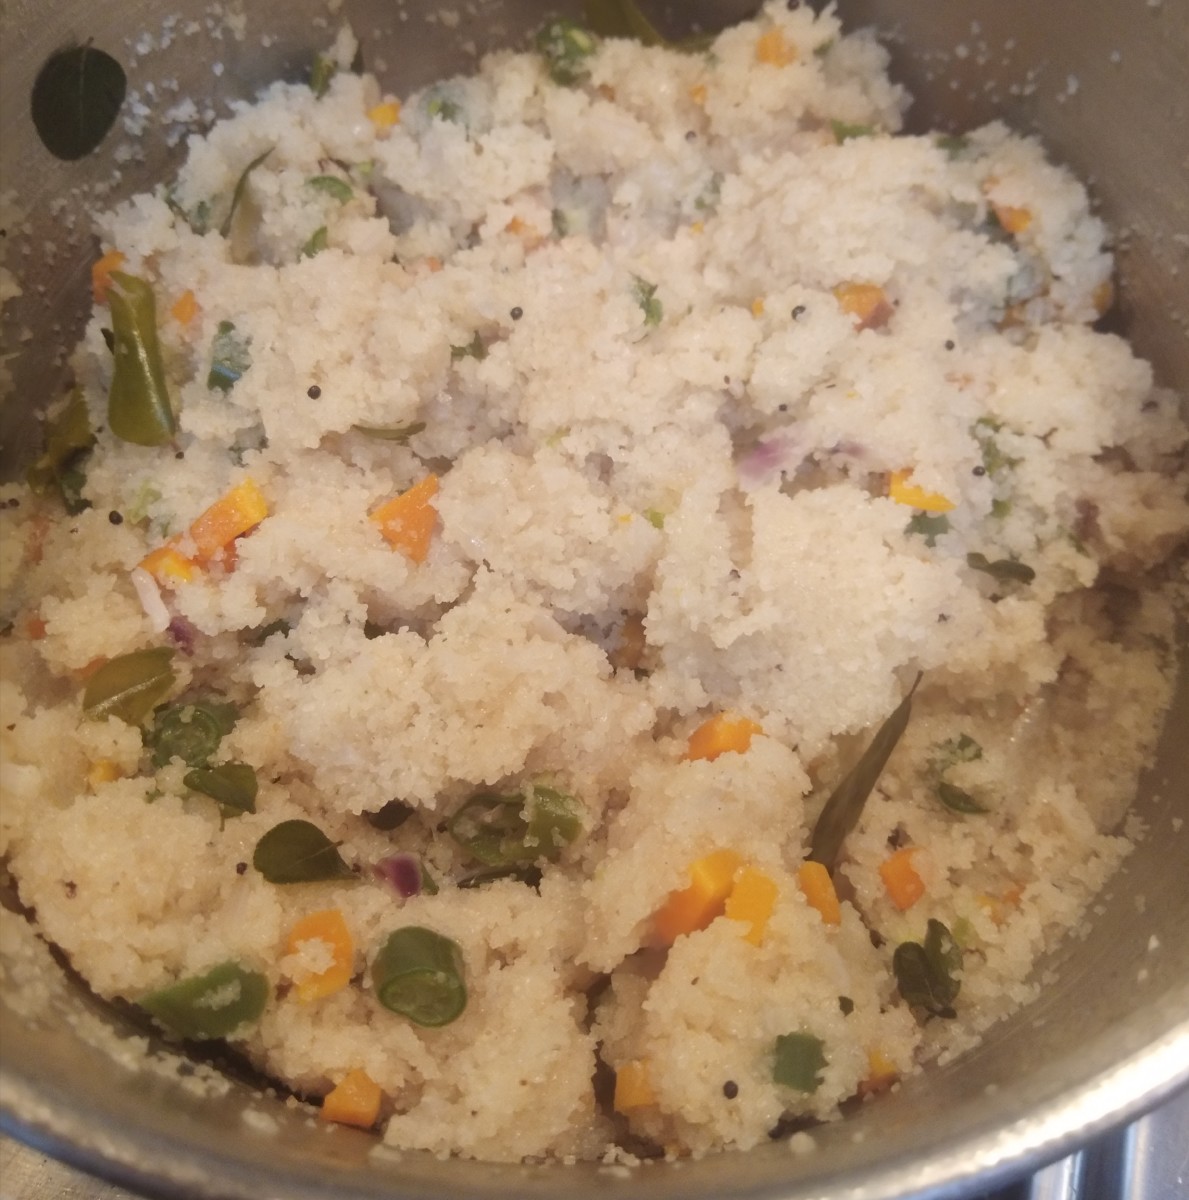 By that time rava absorbs all water and thickens. Once the water is absorbed cook covered on low flame for  for 3-4 minutes to get soft upma. Keep stirring in between.